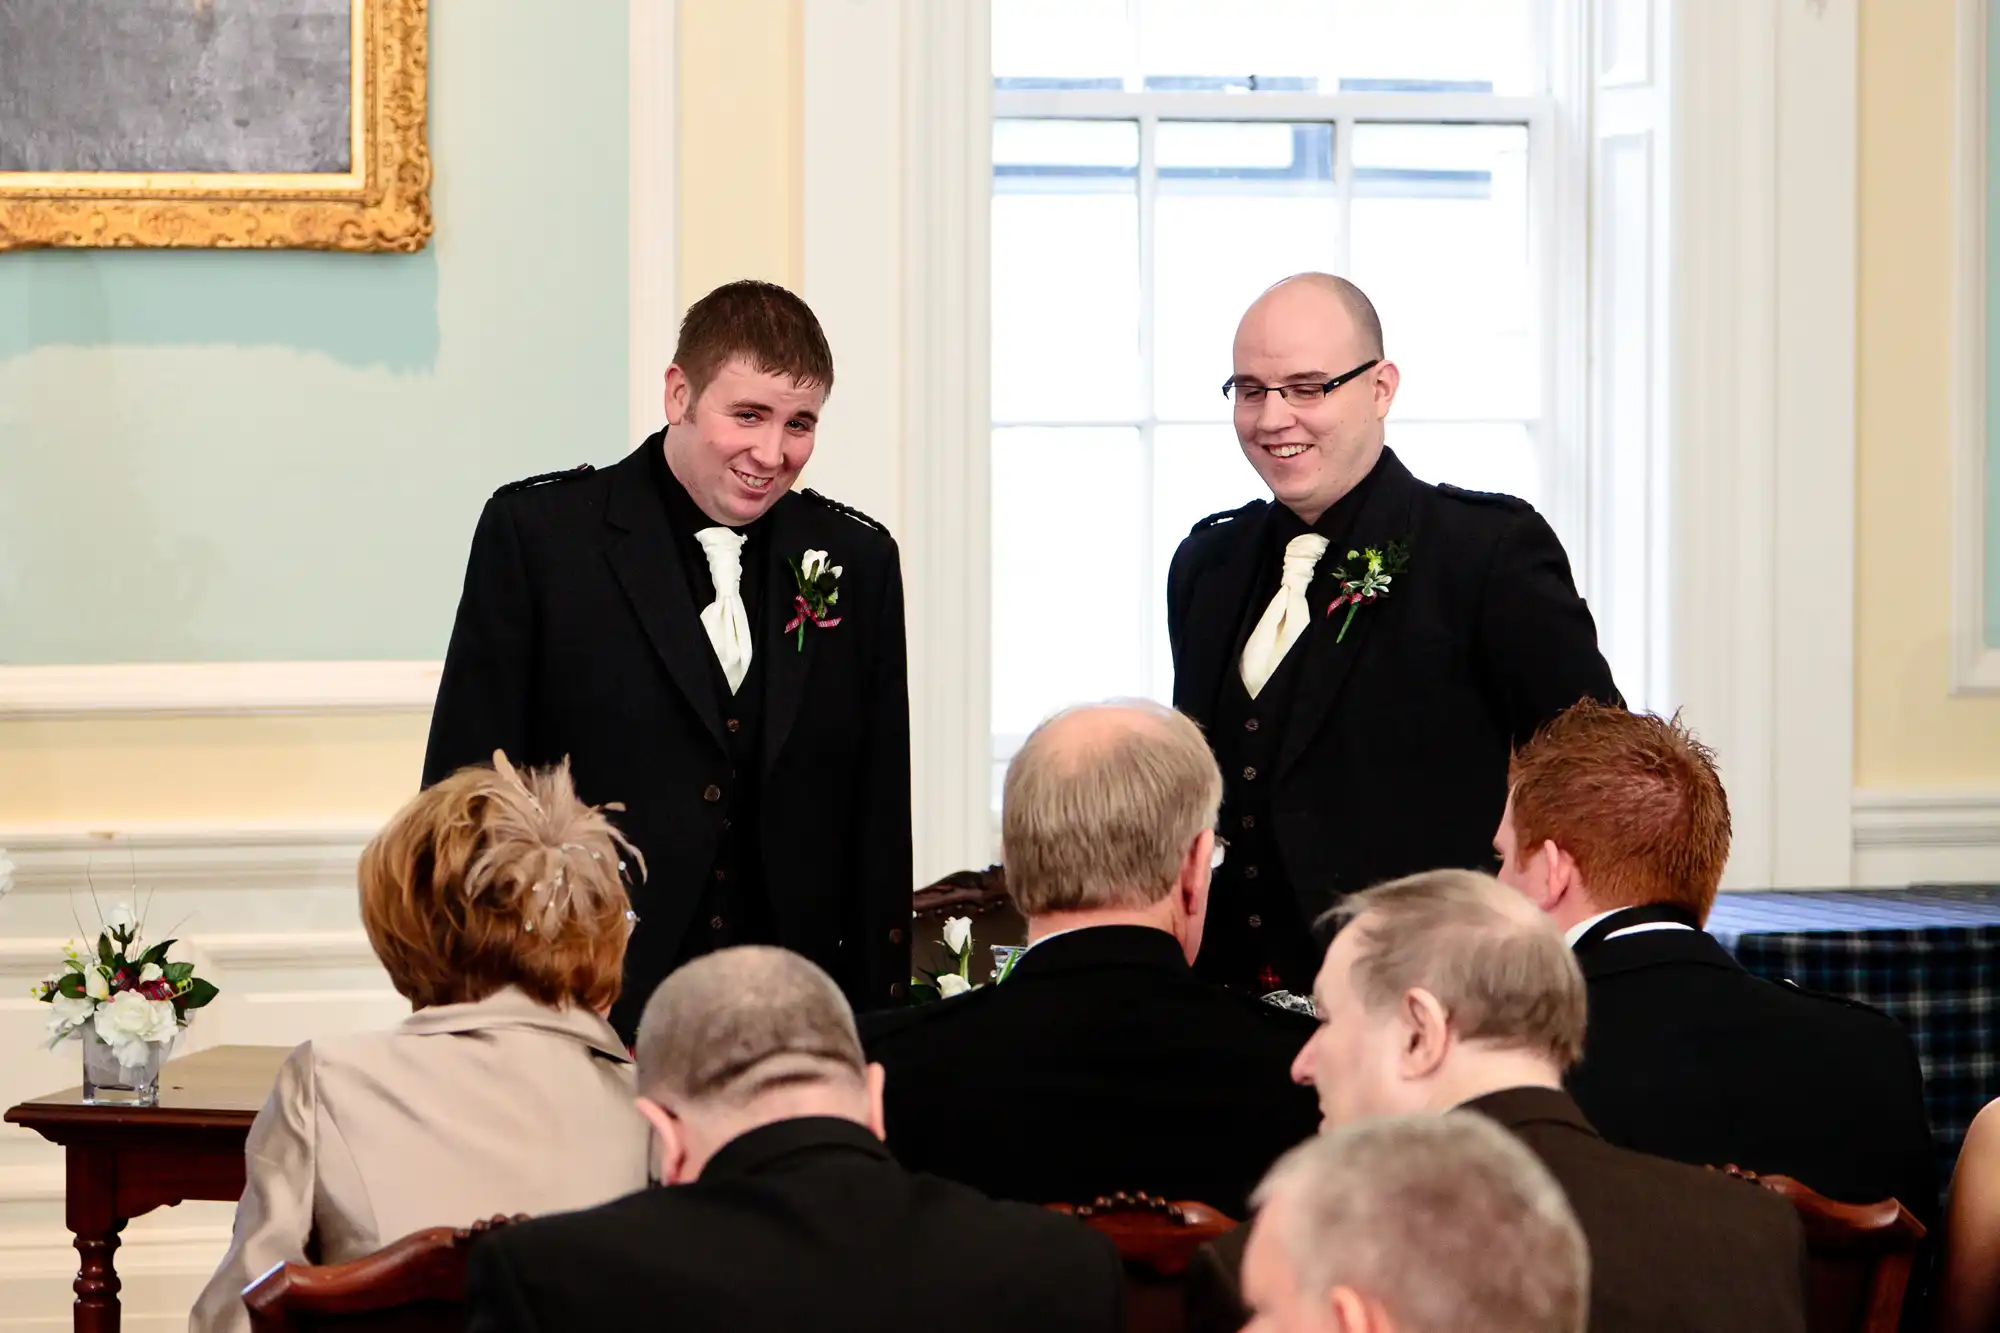 Two men in tuxedos, smiling during a wedding ceremony in a room with guests and elegant decor.